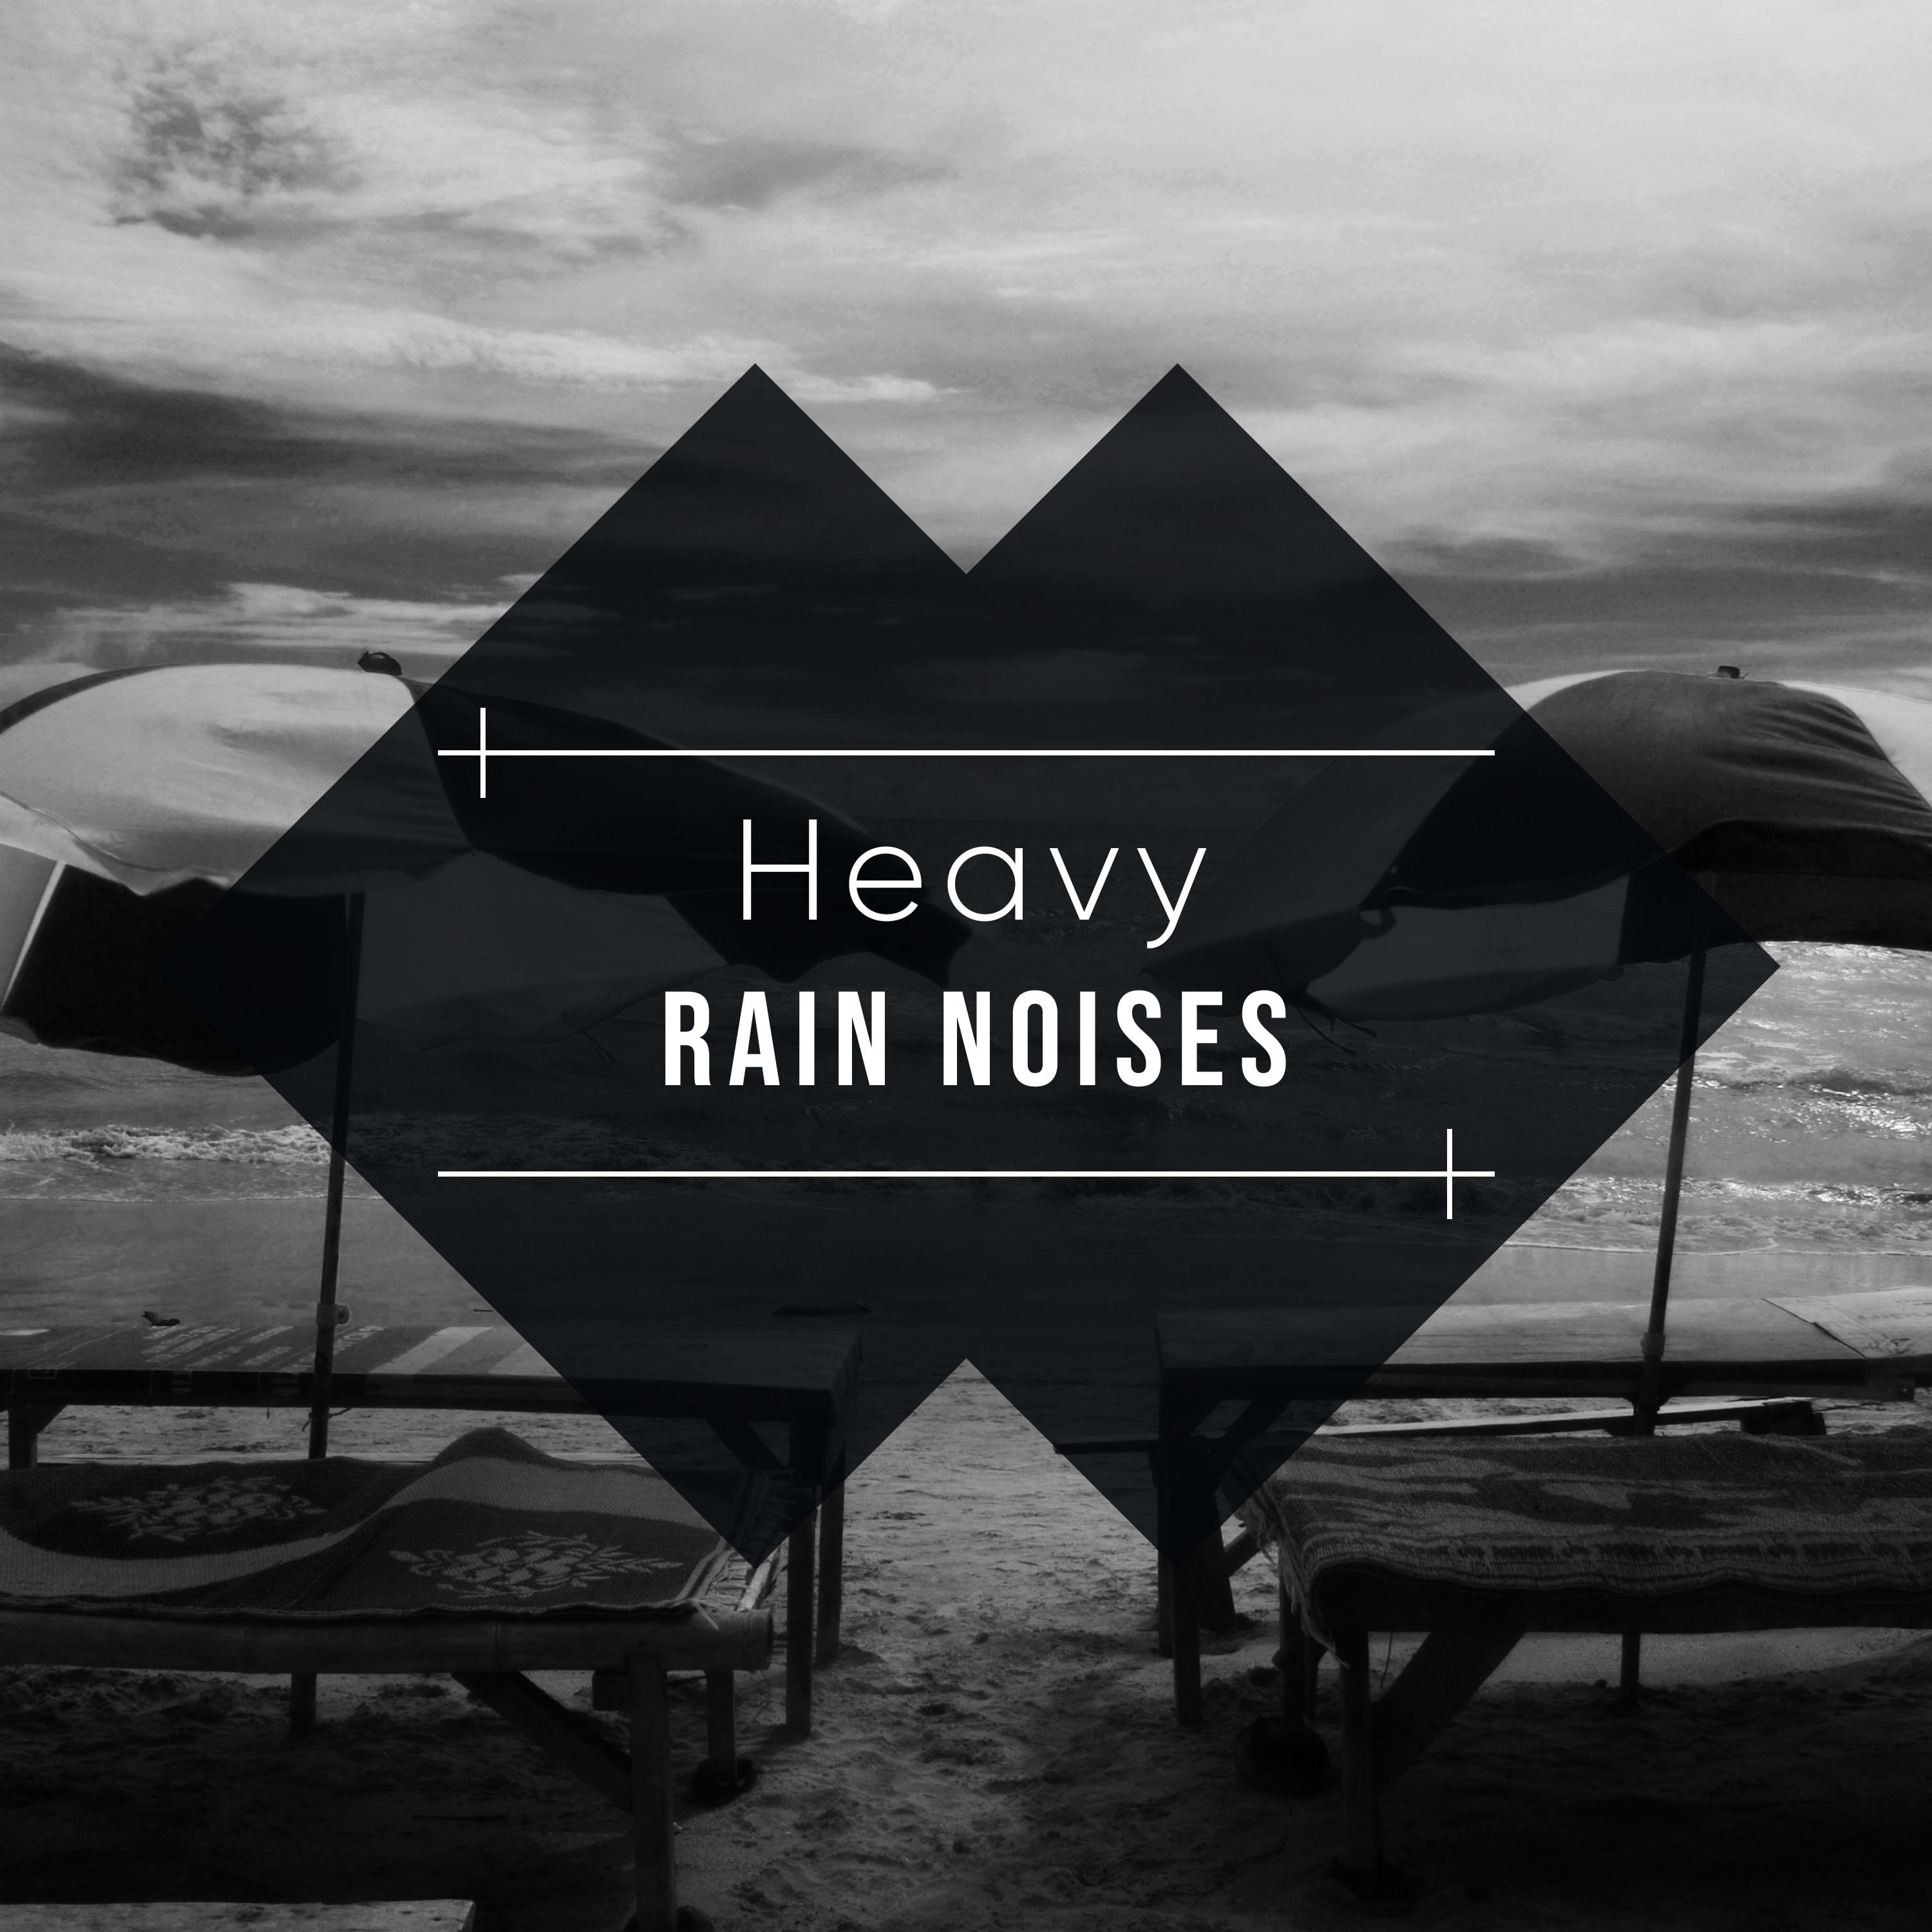 #2018 Heavy Rain Noises from Mother Nature